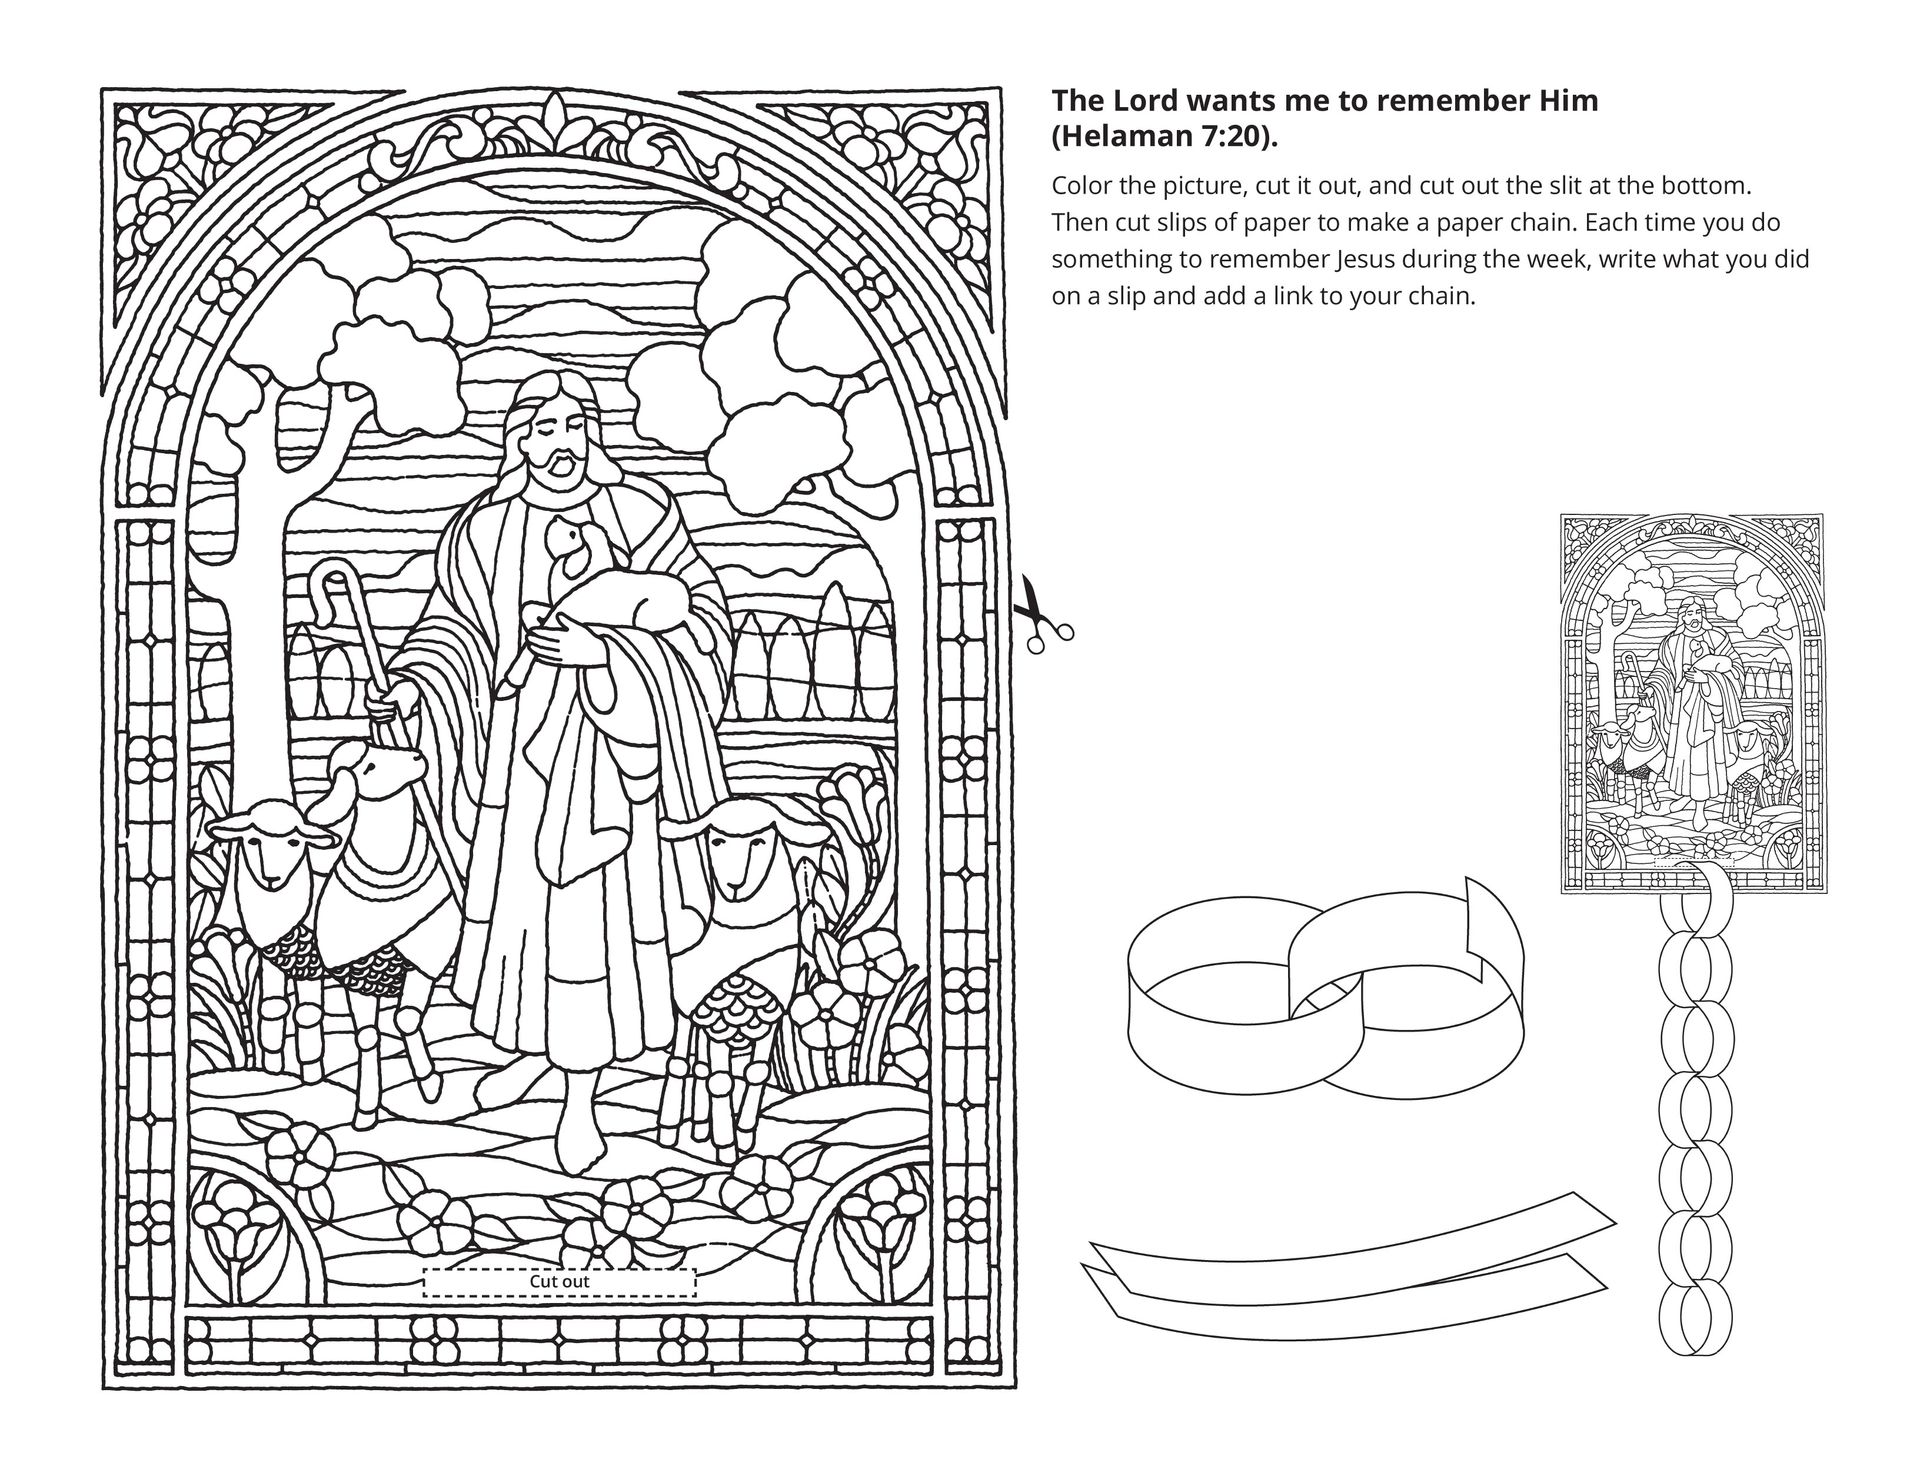 Line art of a stained glass window depicting Christ as the Good Shepherd.